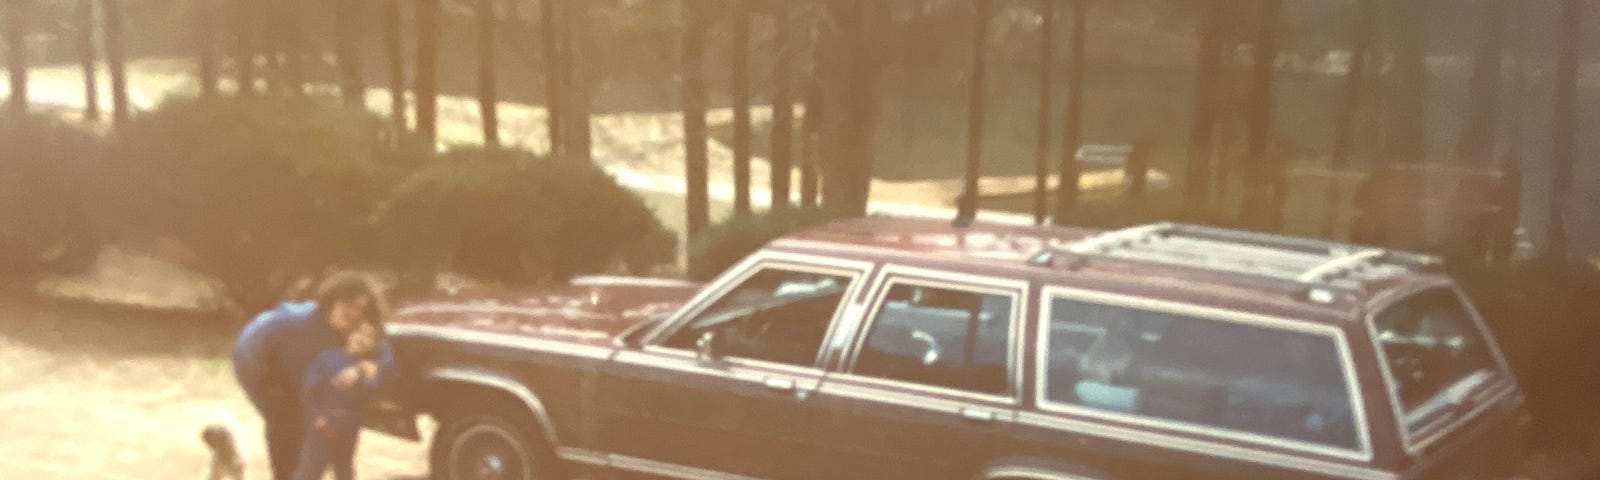 1984 Station Wagon with fake wood on the sides.